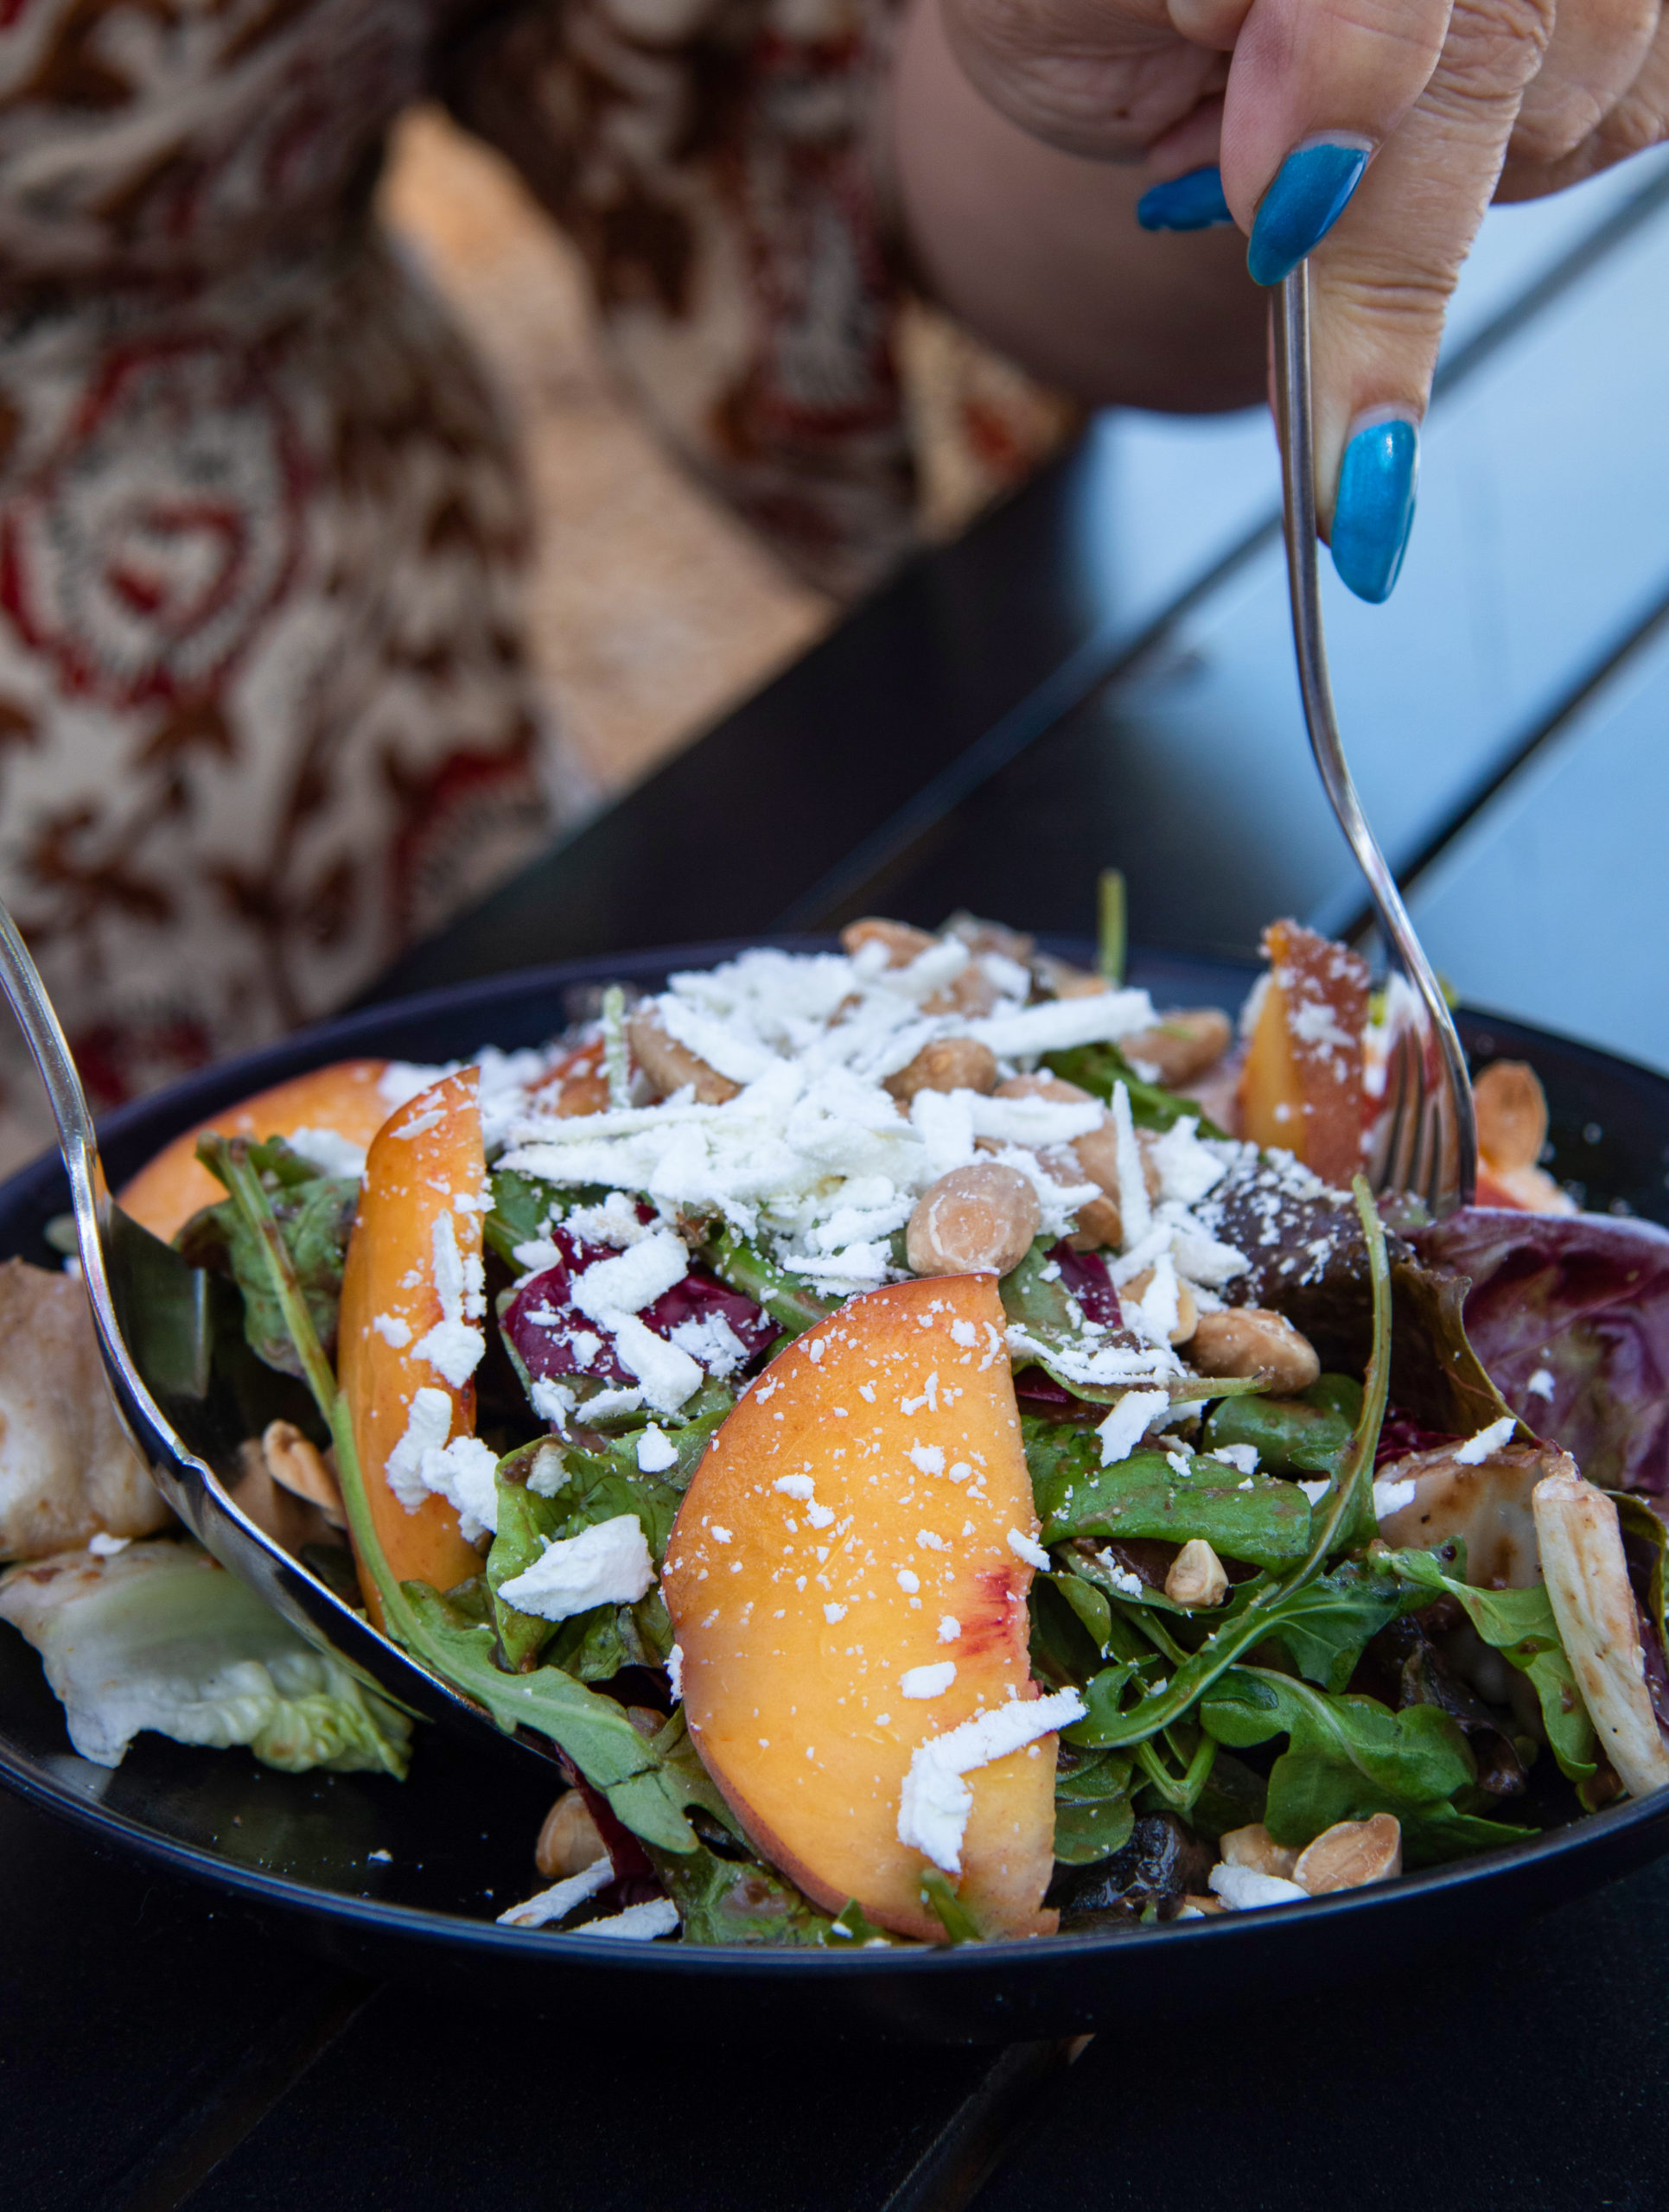 Peach salad at The Spinster Sisters in Santa Rosa. (Heather Irwin/Sonoma Magazine).